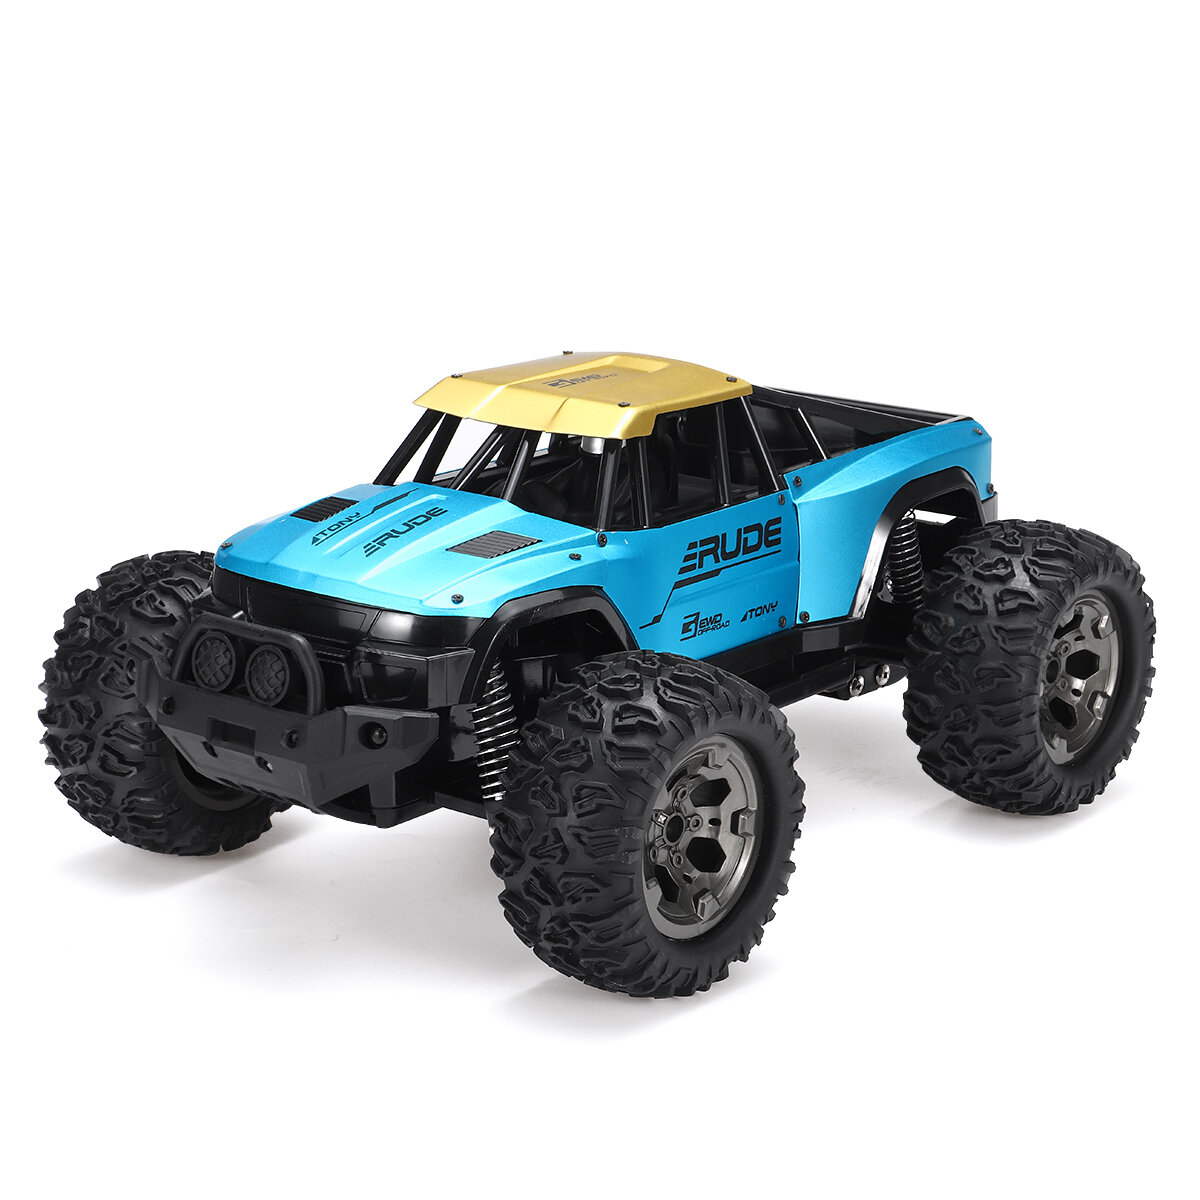 Image of KYAMRC 2211B 1/12 24G RWD 25Km/h RTR RC Car Remote Control Off Road Crawlers Electric Truck Vehicle Kids Children Toys